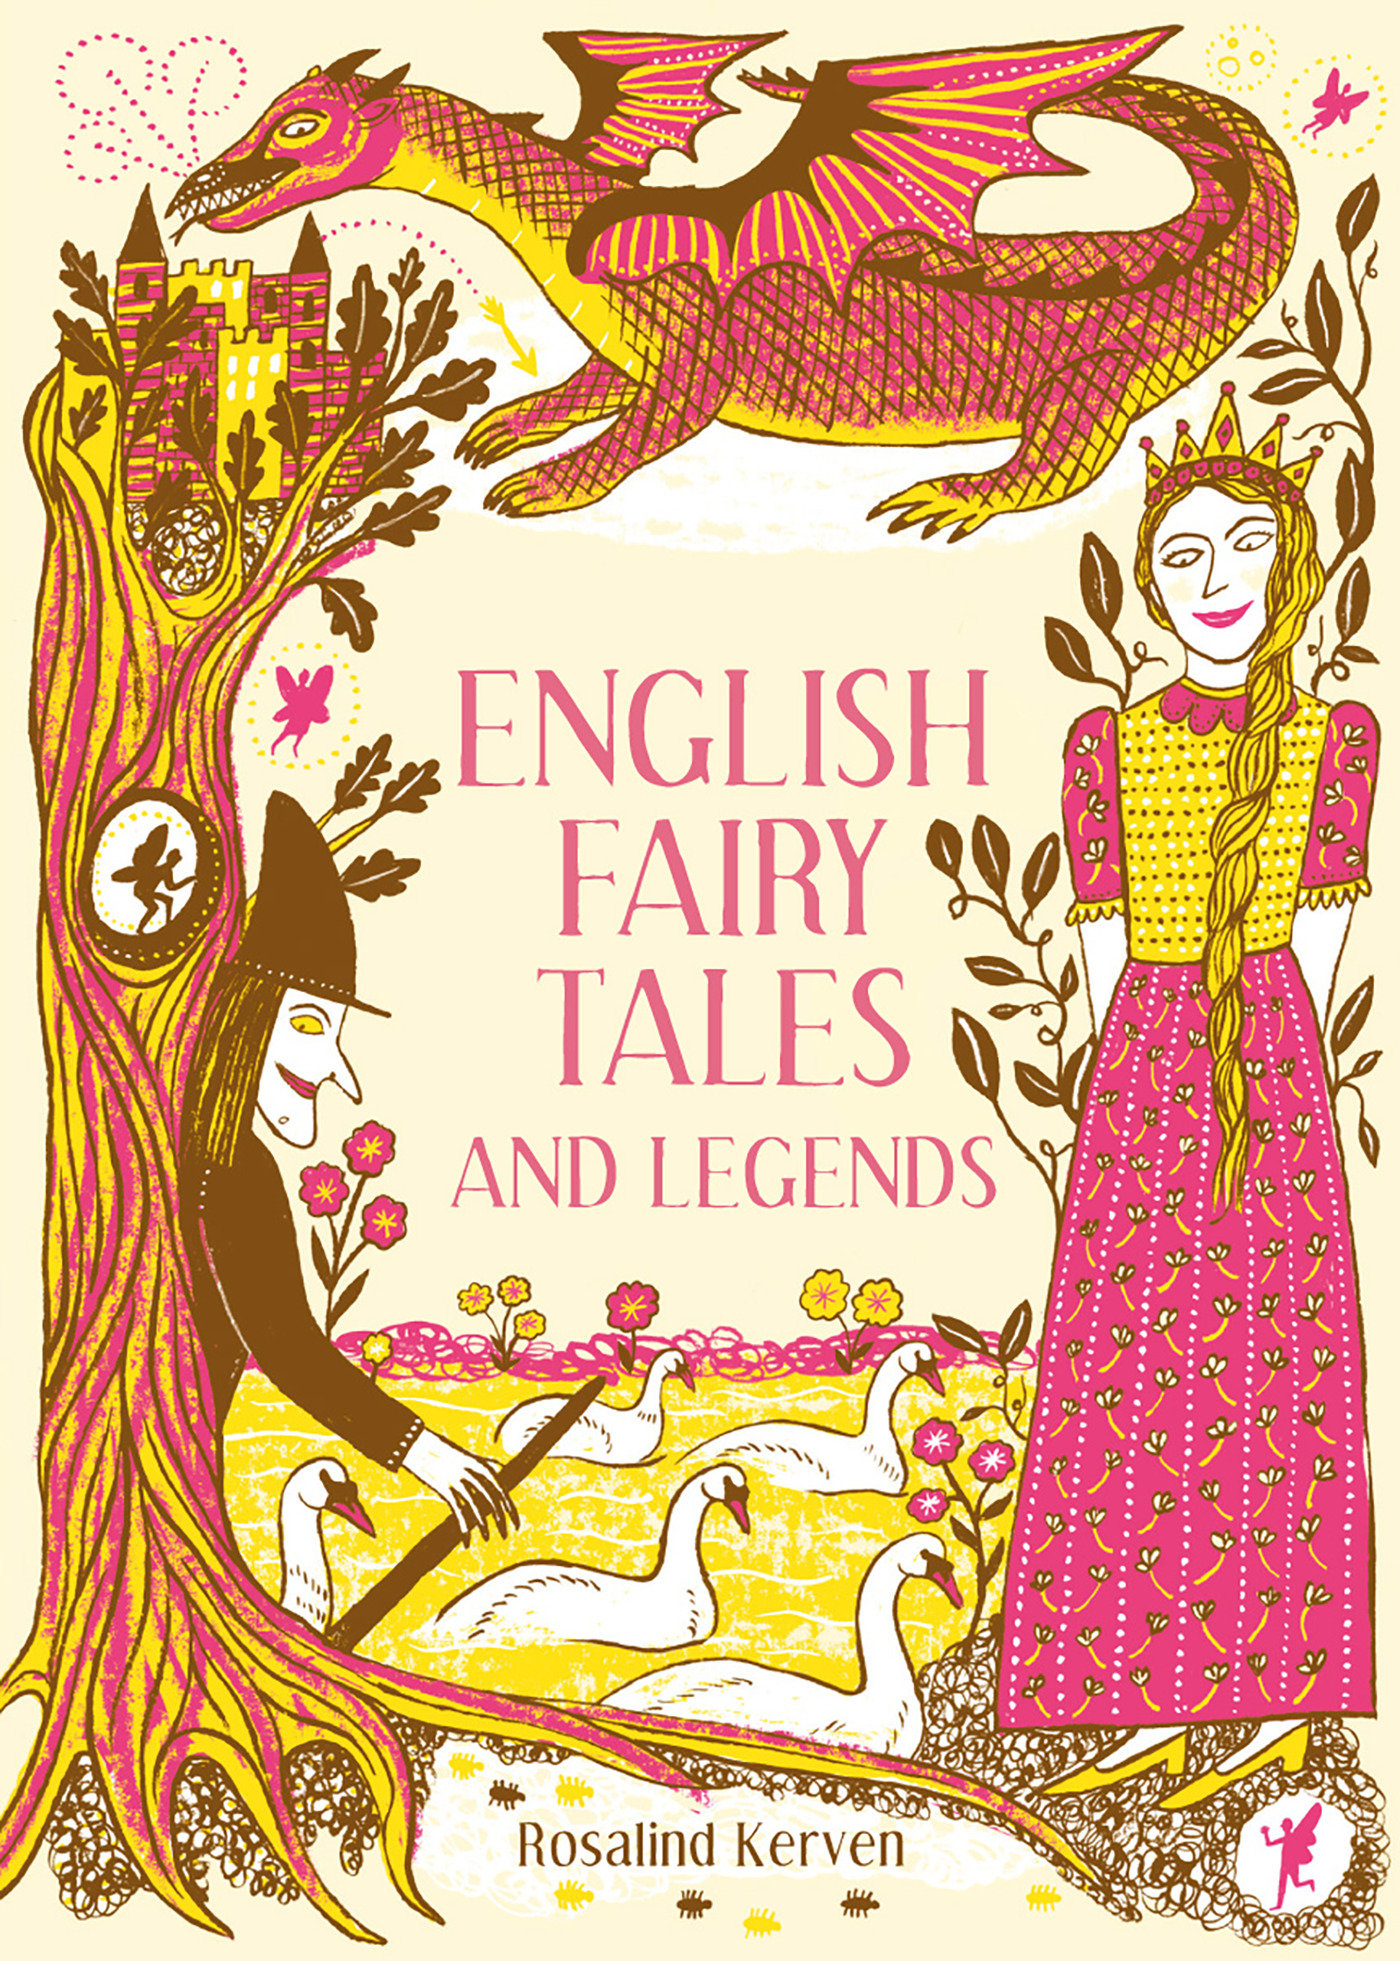 English Fairy Tales And Legends (Hardcover Book)